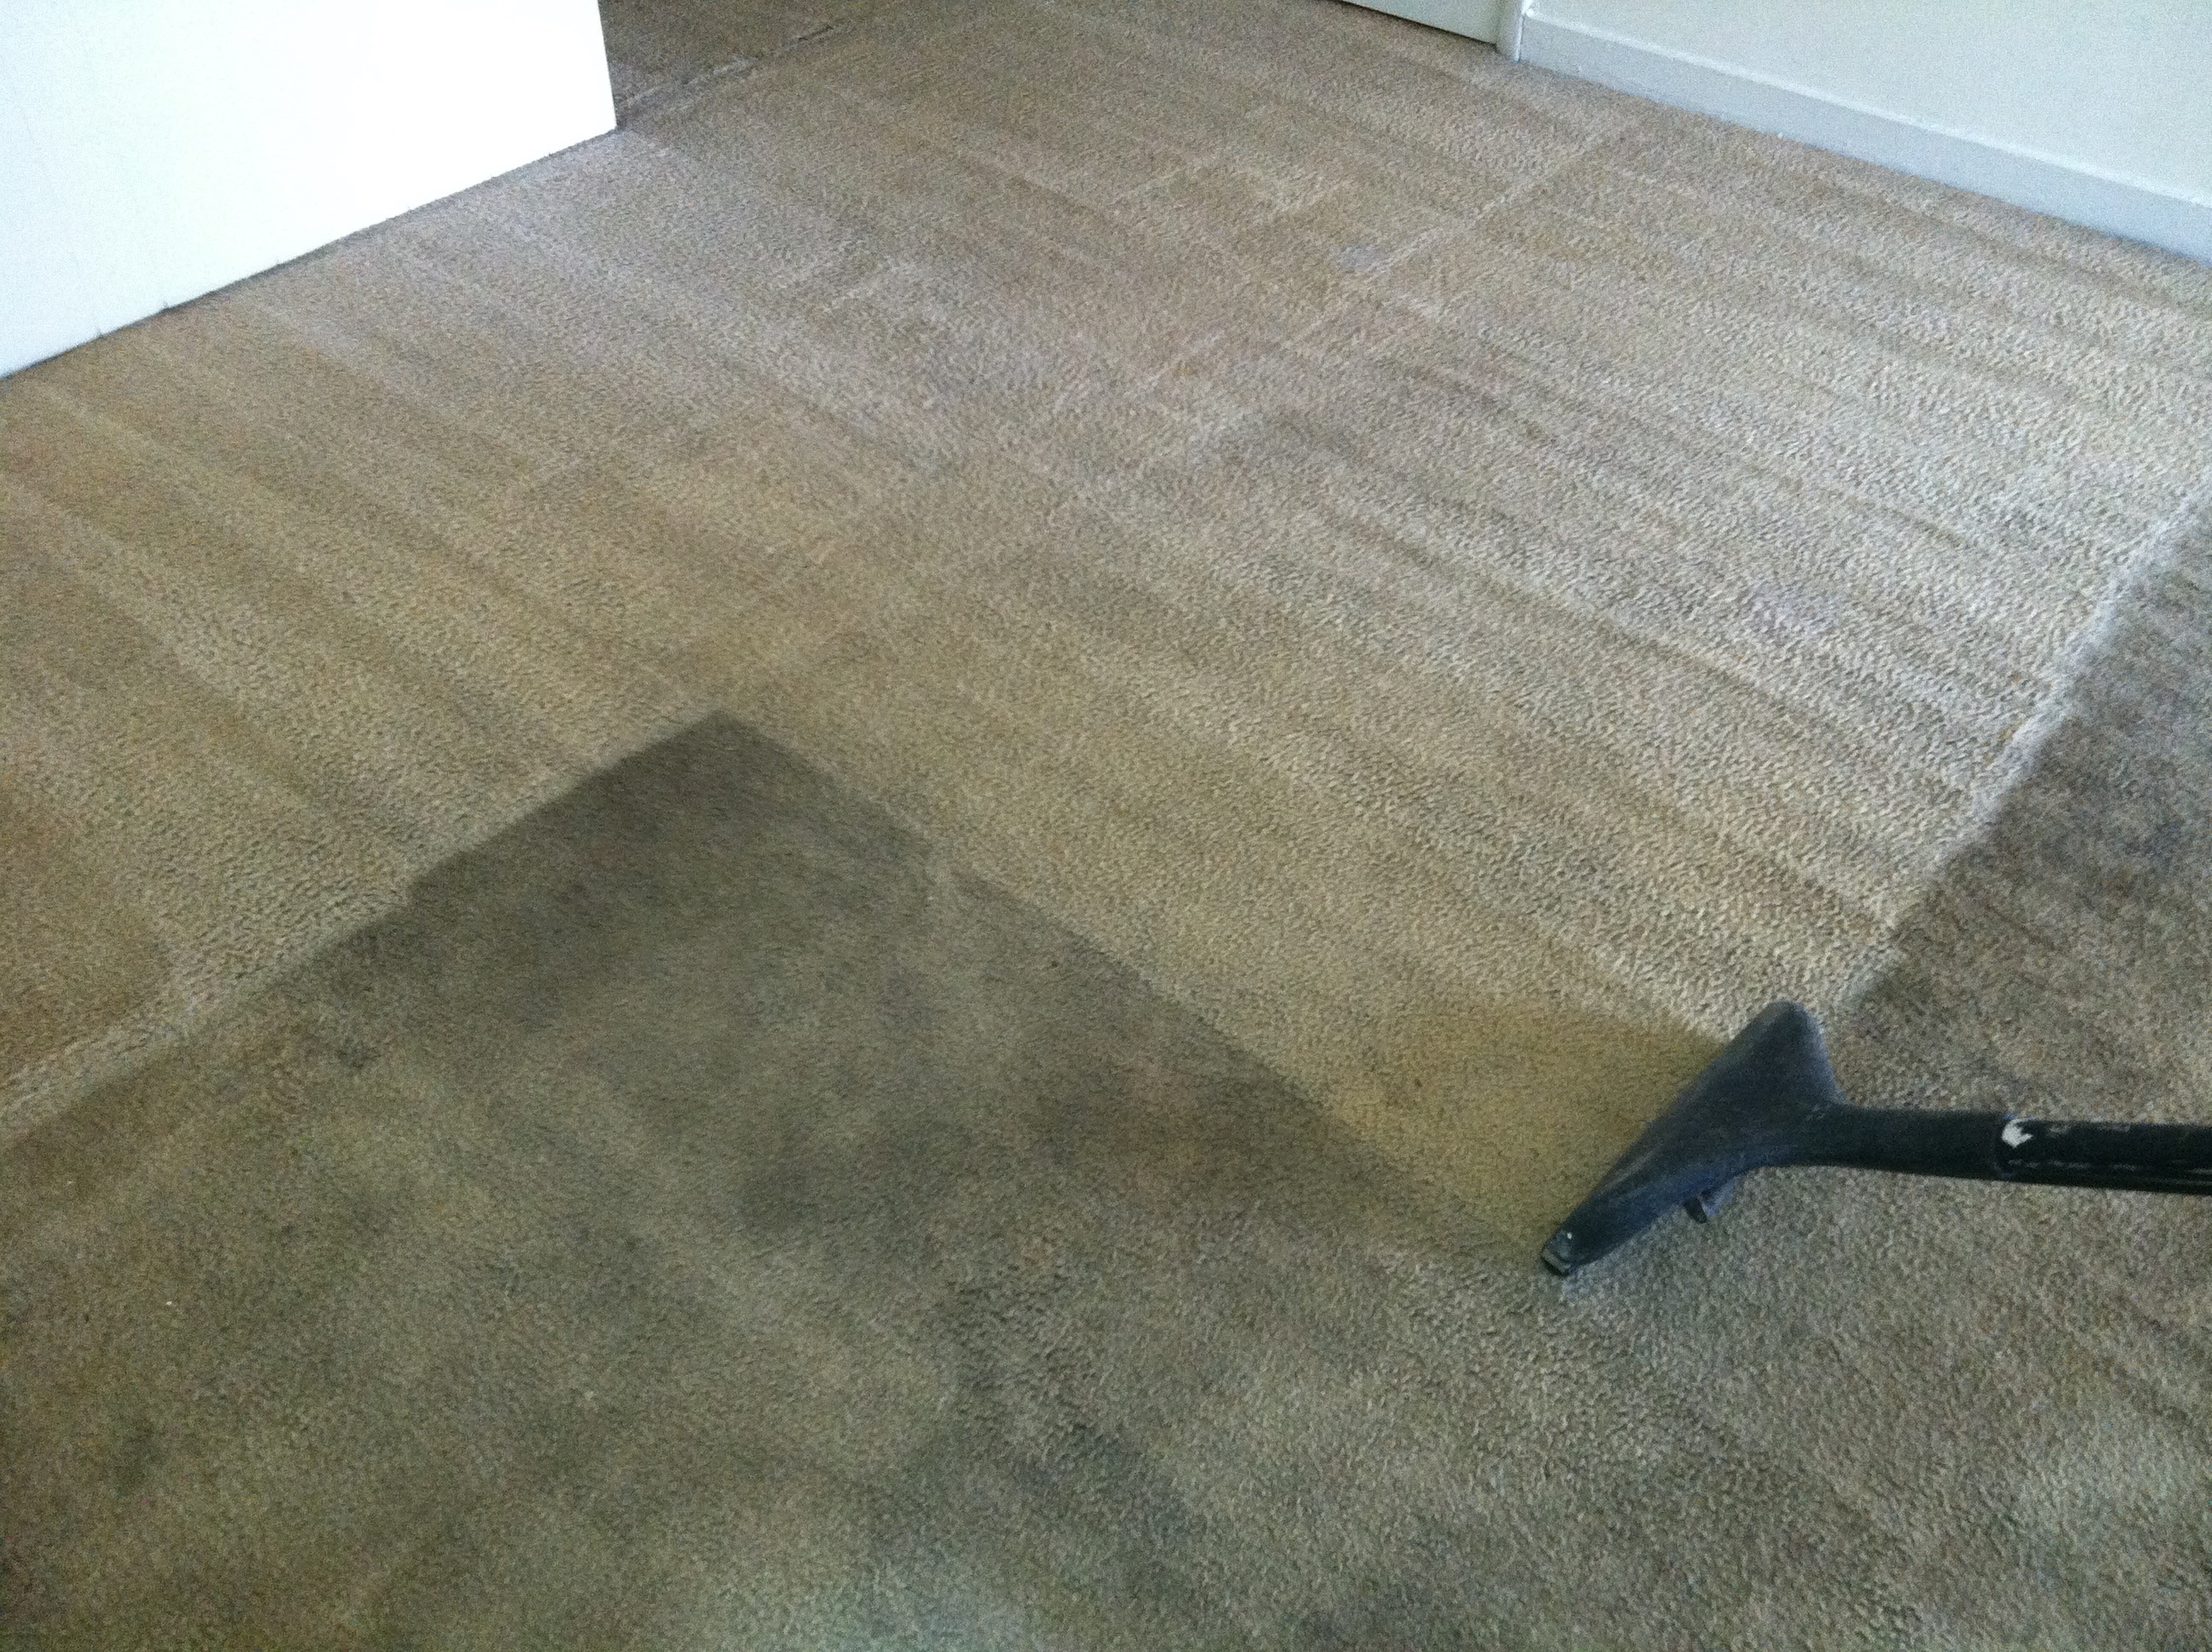 Steps You Can Implement for Eliminating Dry Carpet Stains